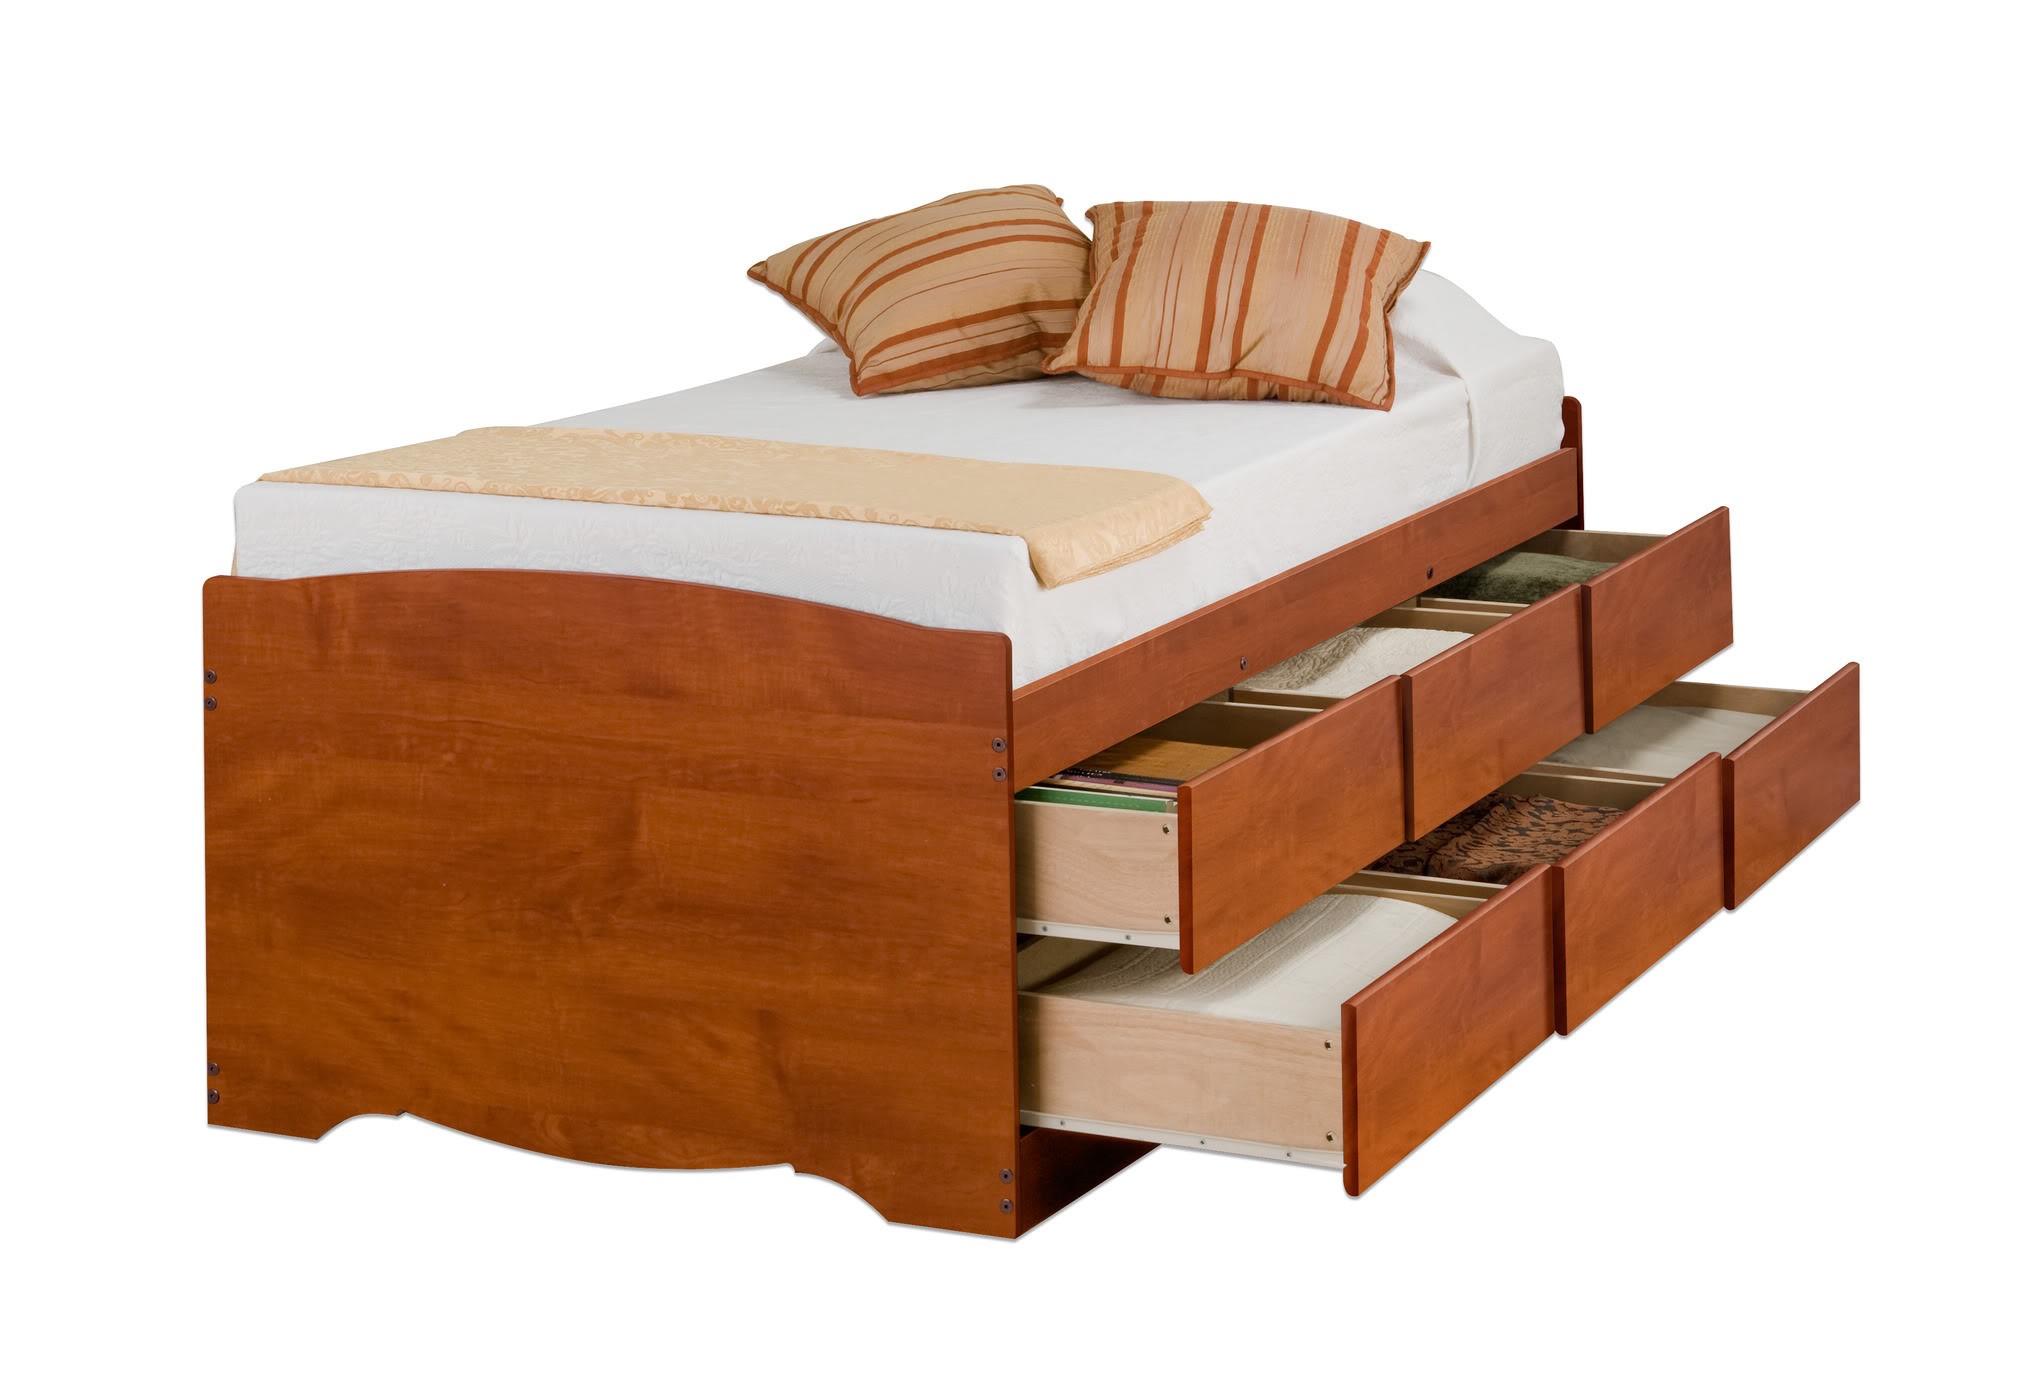 Cherry wood twin bed